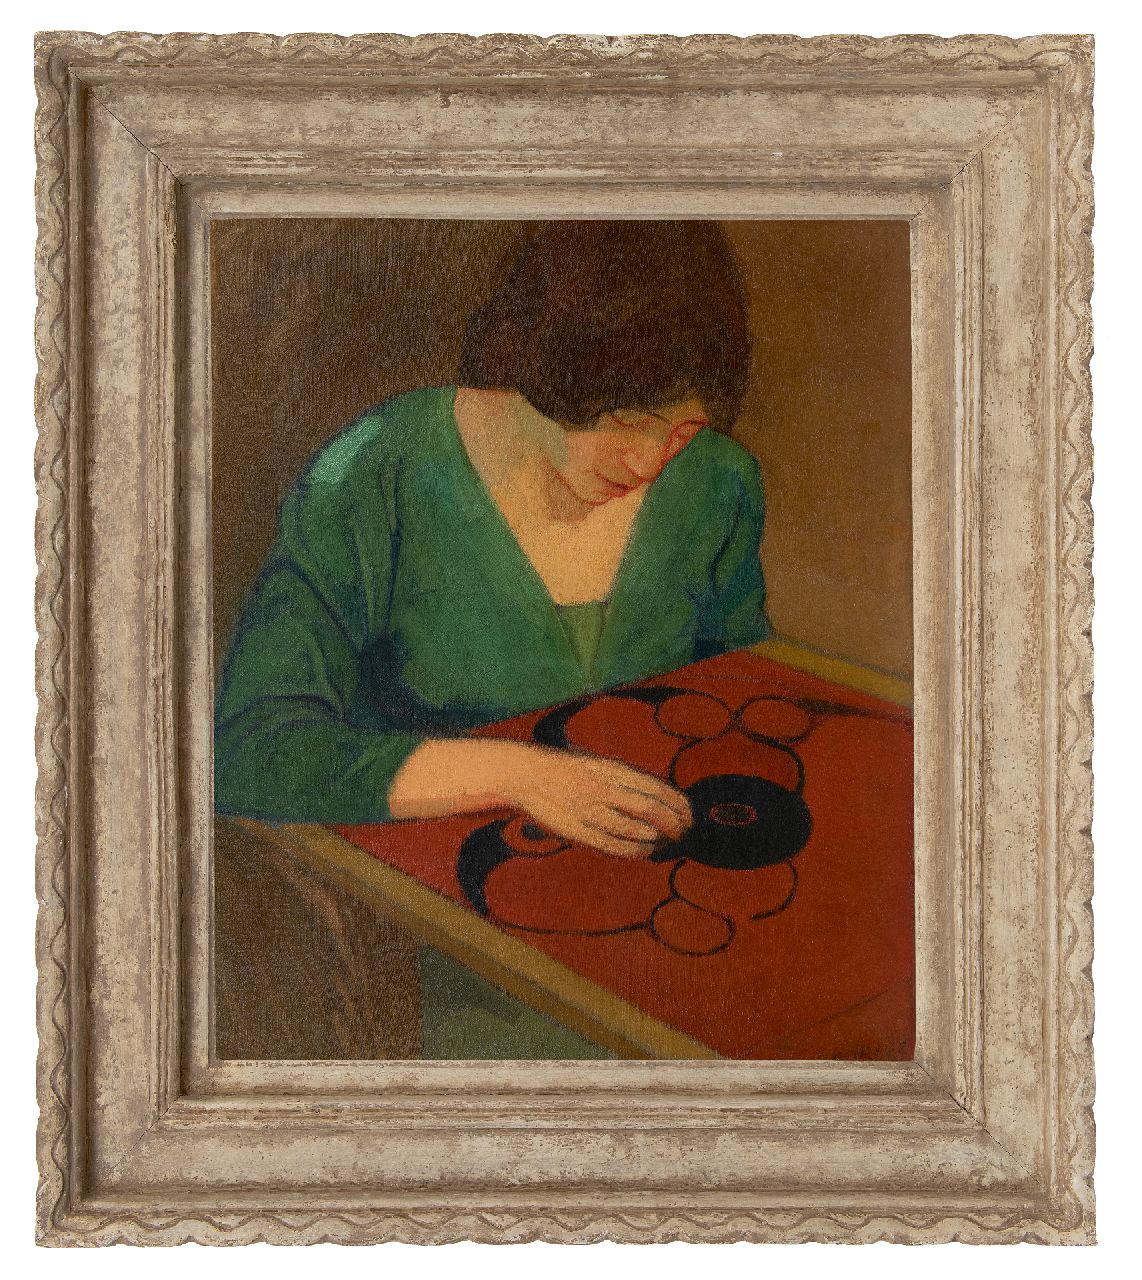 Rees O. van | Otto van Rees | Paintings offered for sale | Adya working on red embroidery, oil on canvas 65.2 x 54.0 cm, signed l.r. and dated 1910